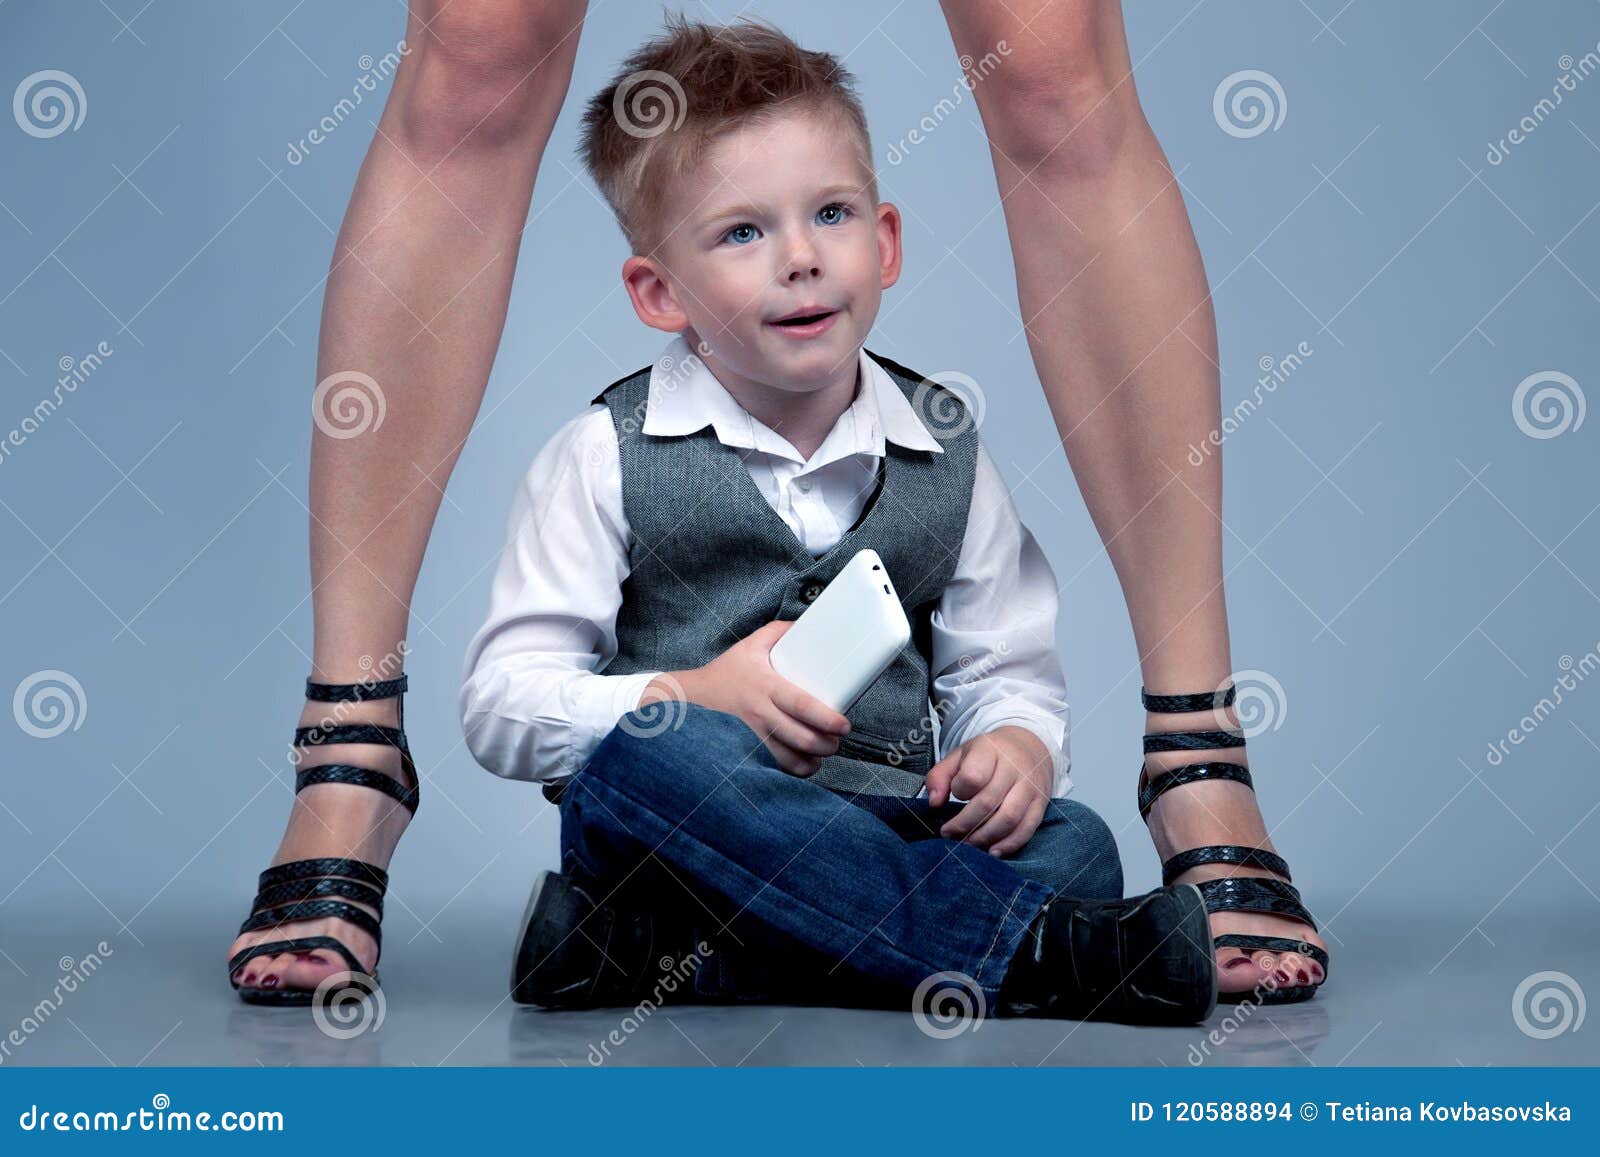 High Heels Family Concept. Stylish Baby Boy Standing with His Fa ...